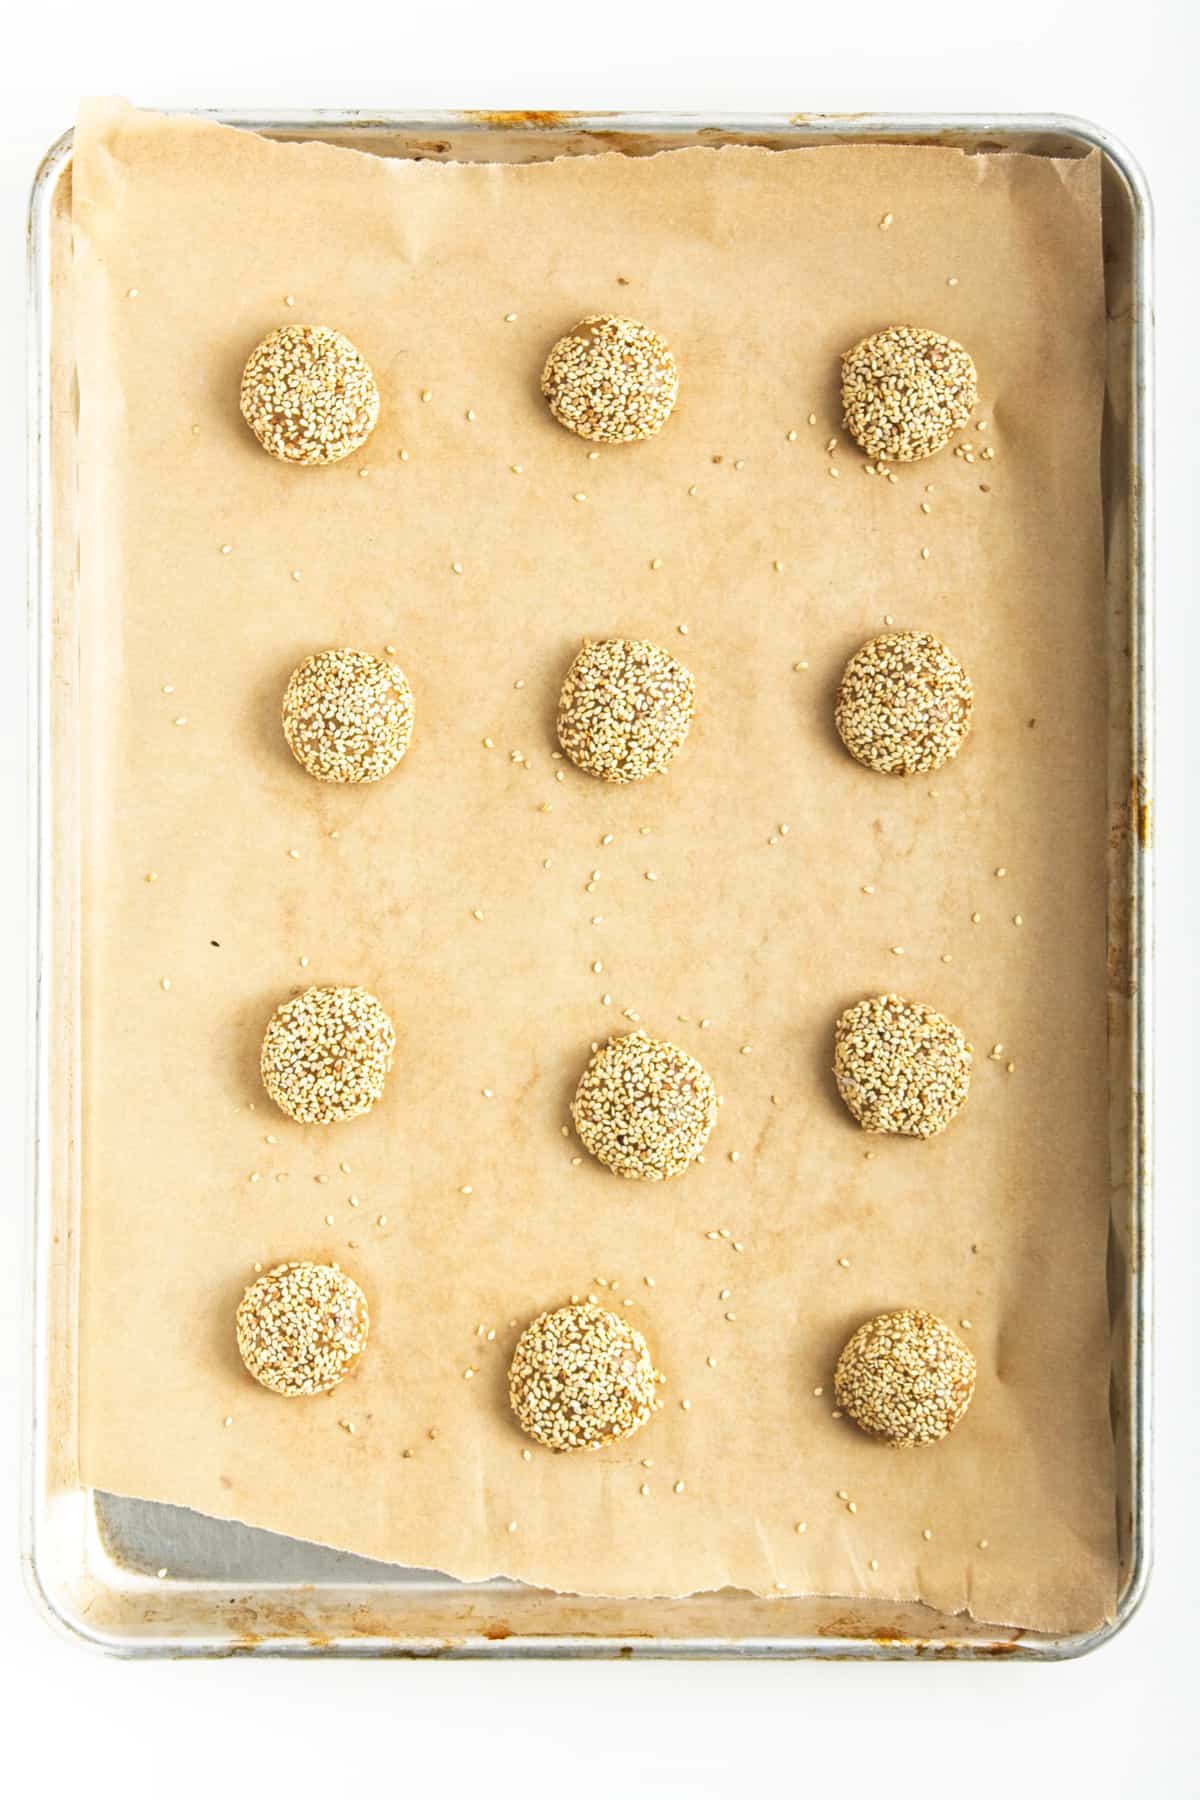 Cookies rolled in sesame seeds on a lined baking sheet.